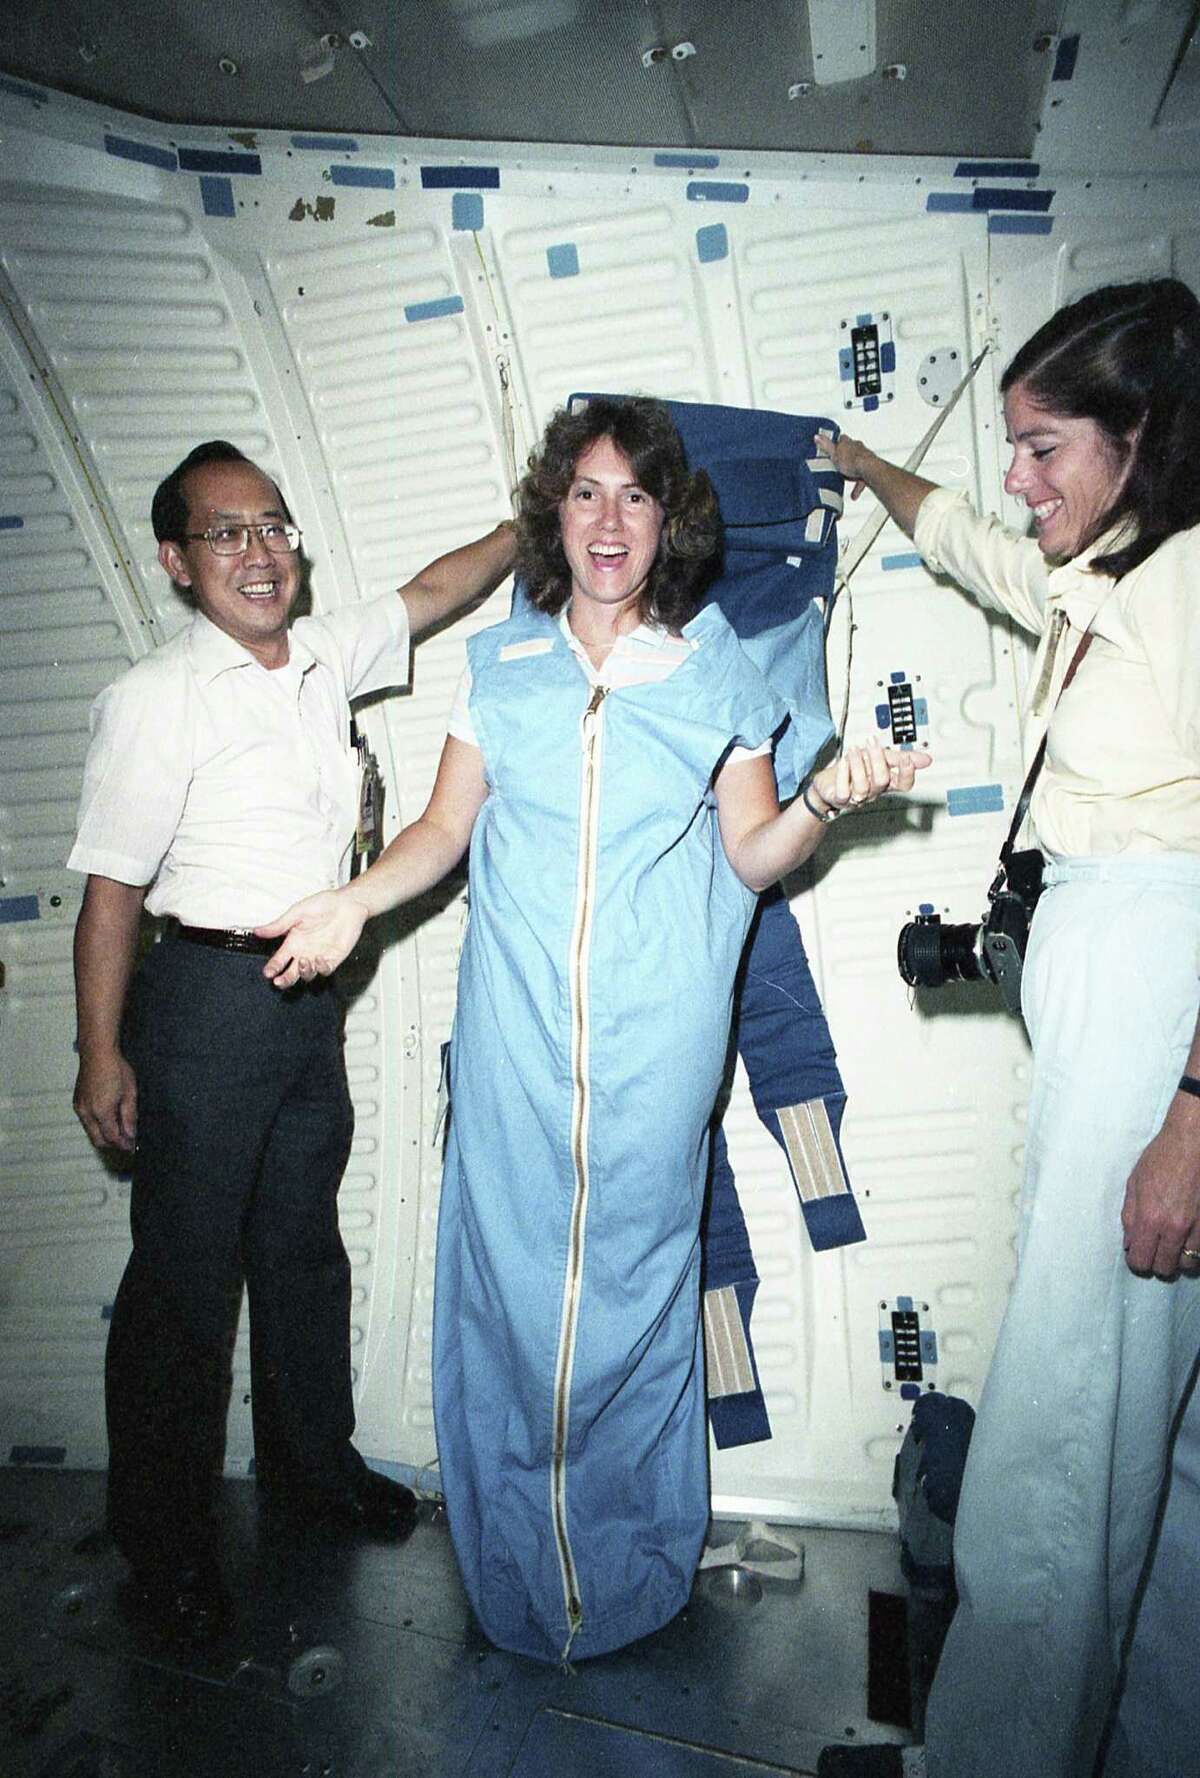 Teacher Christa McAuliffe gets a tour of the space shuttle mockups at the public affairs offices at the Johnson Space Center, Sept. 12, 1985. With her is teacher Barbara Morgan, right.